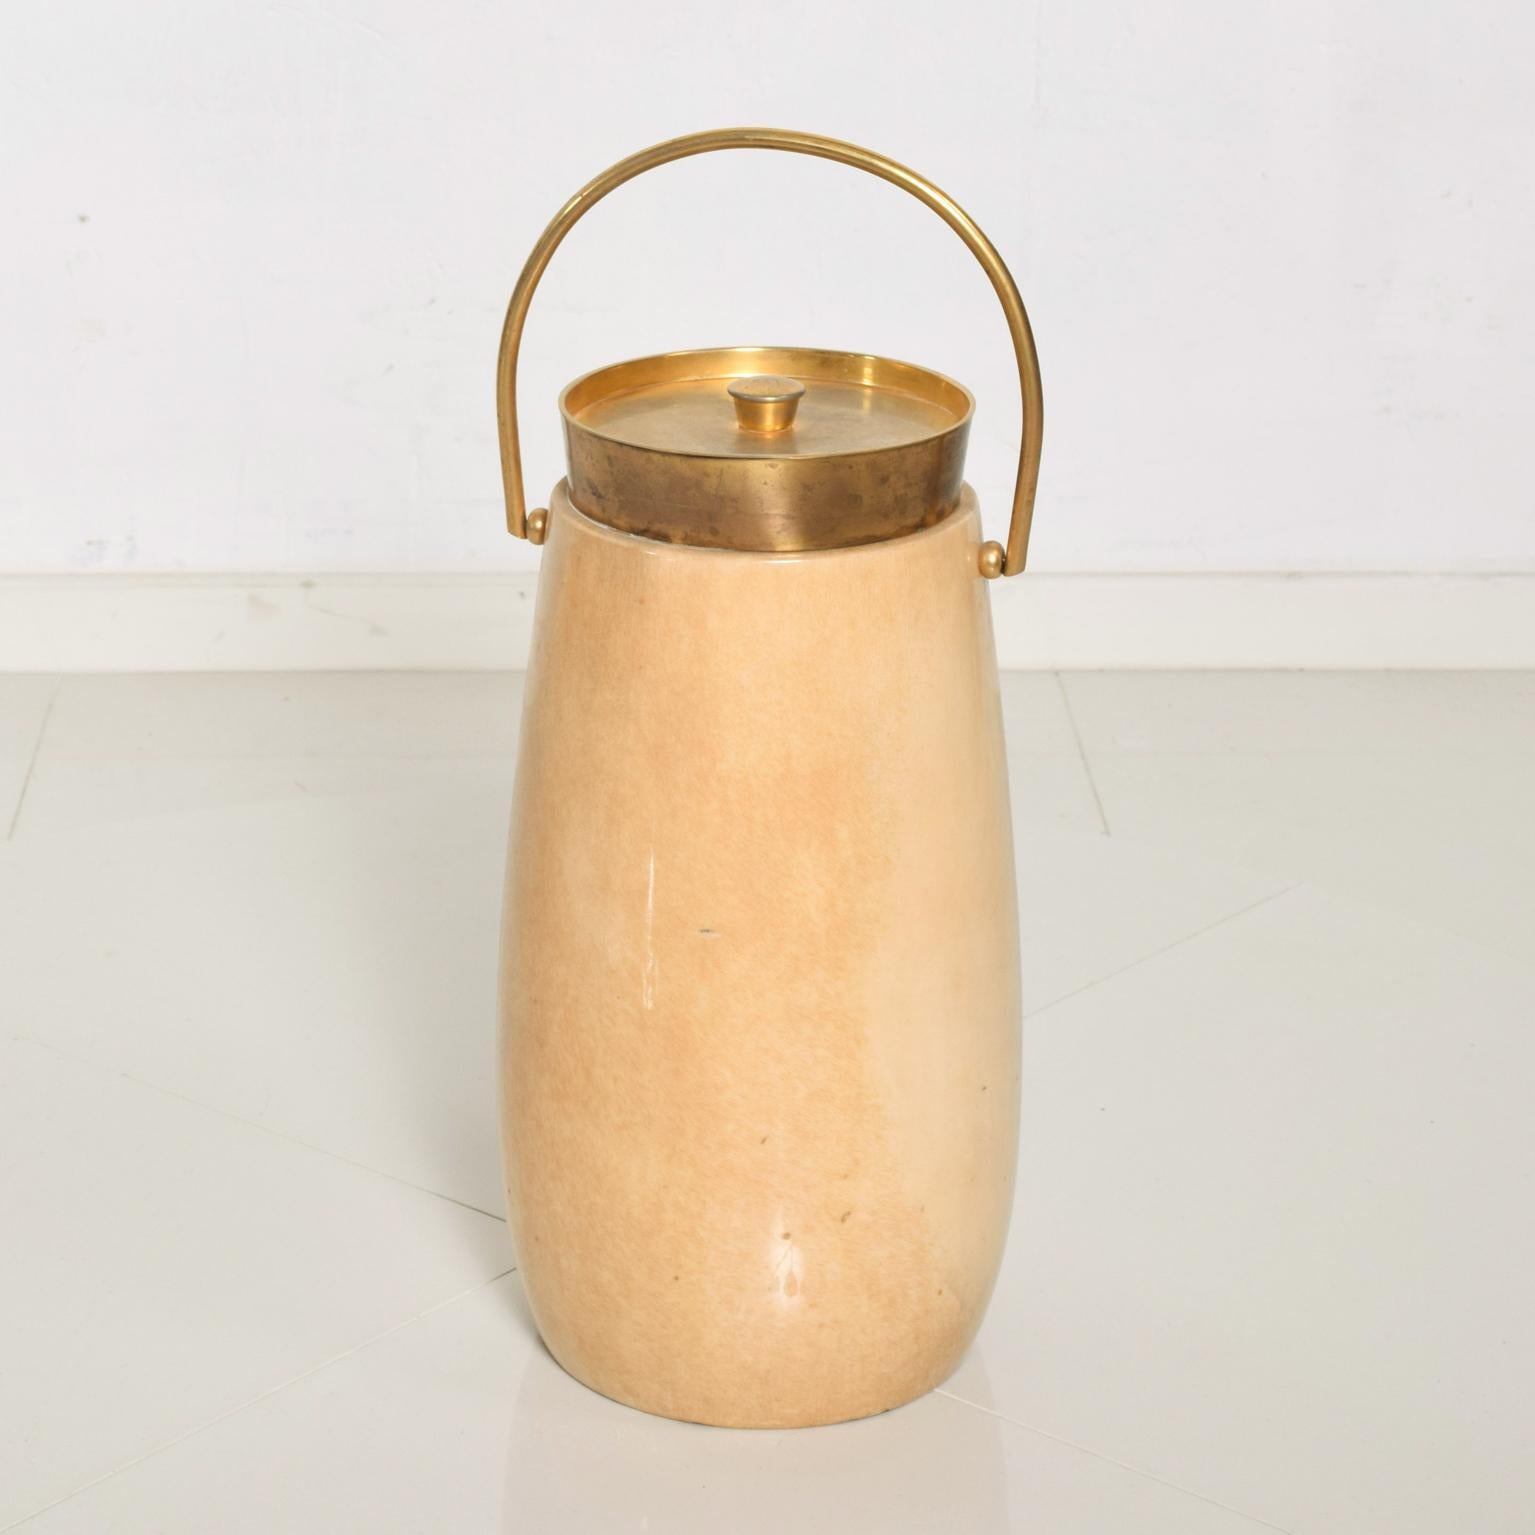 AMBIANIC is pleased to offer beautiful champagne bucket or ice bucket by Aldo Tura. 
Goatskin with original lacquer finish. 
Original brass lid. Label present from the maker. Clean modern lines. 
Made in Italy circa the 1960s. 
Dimensions: 15.5 H x